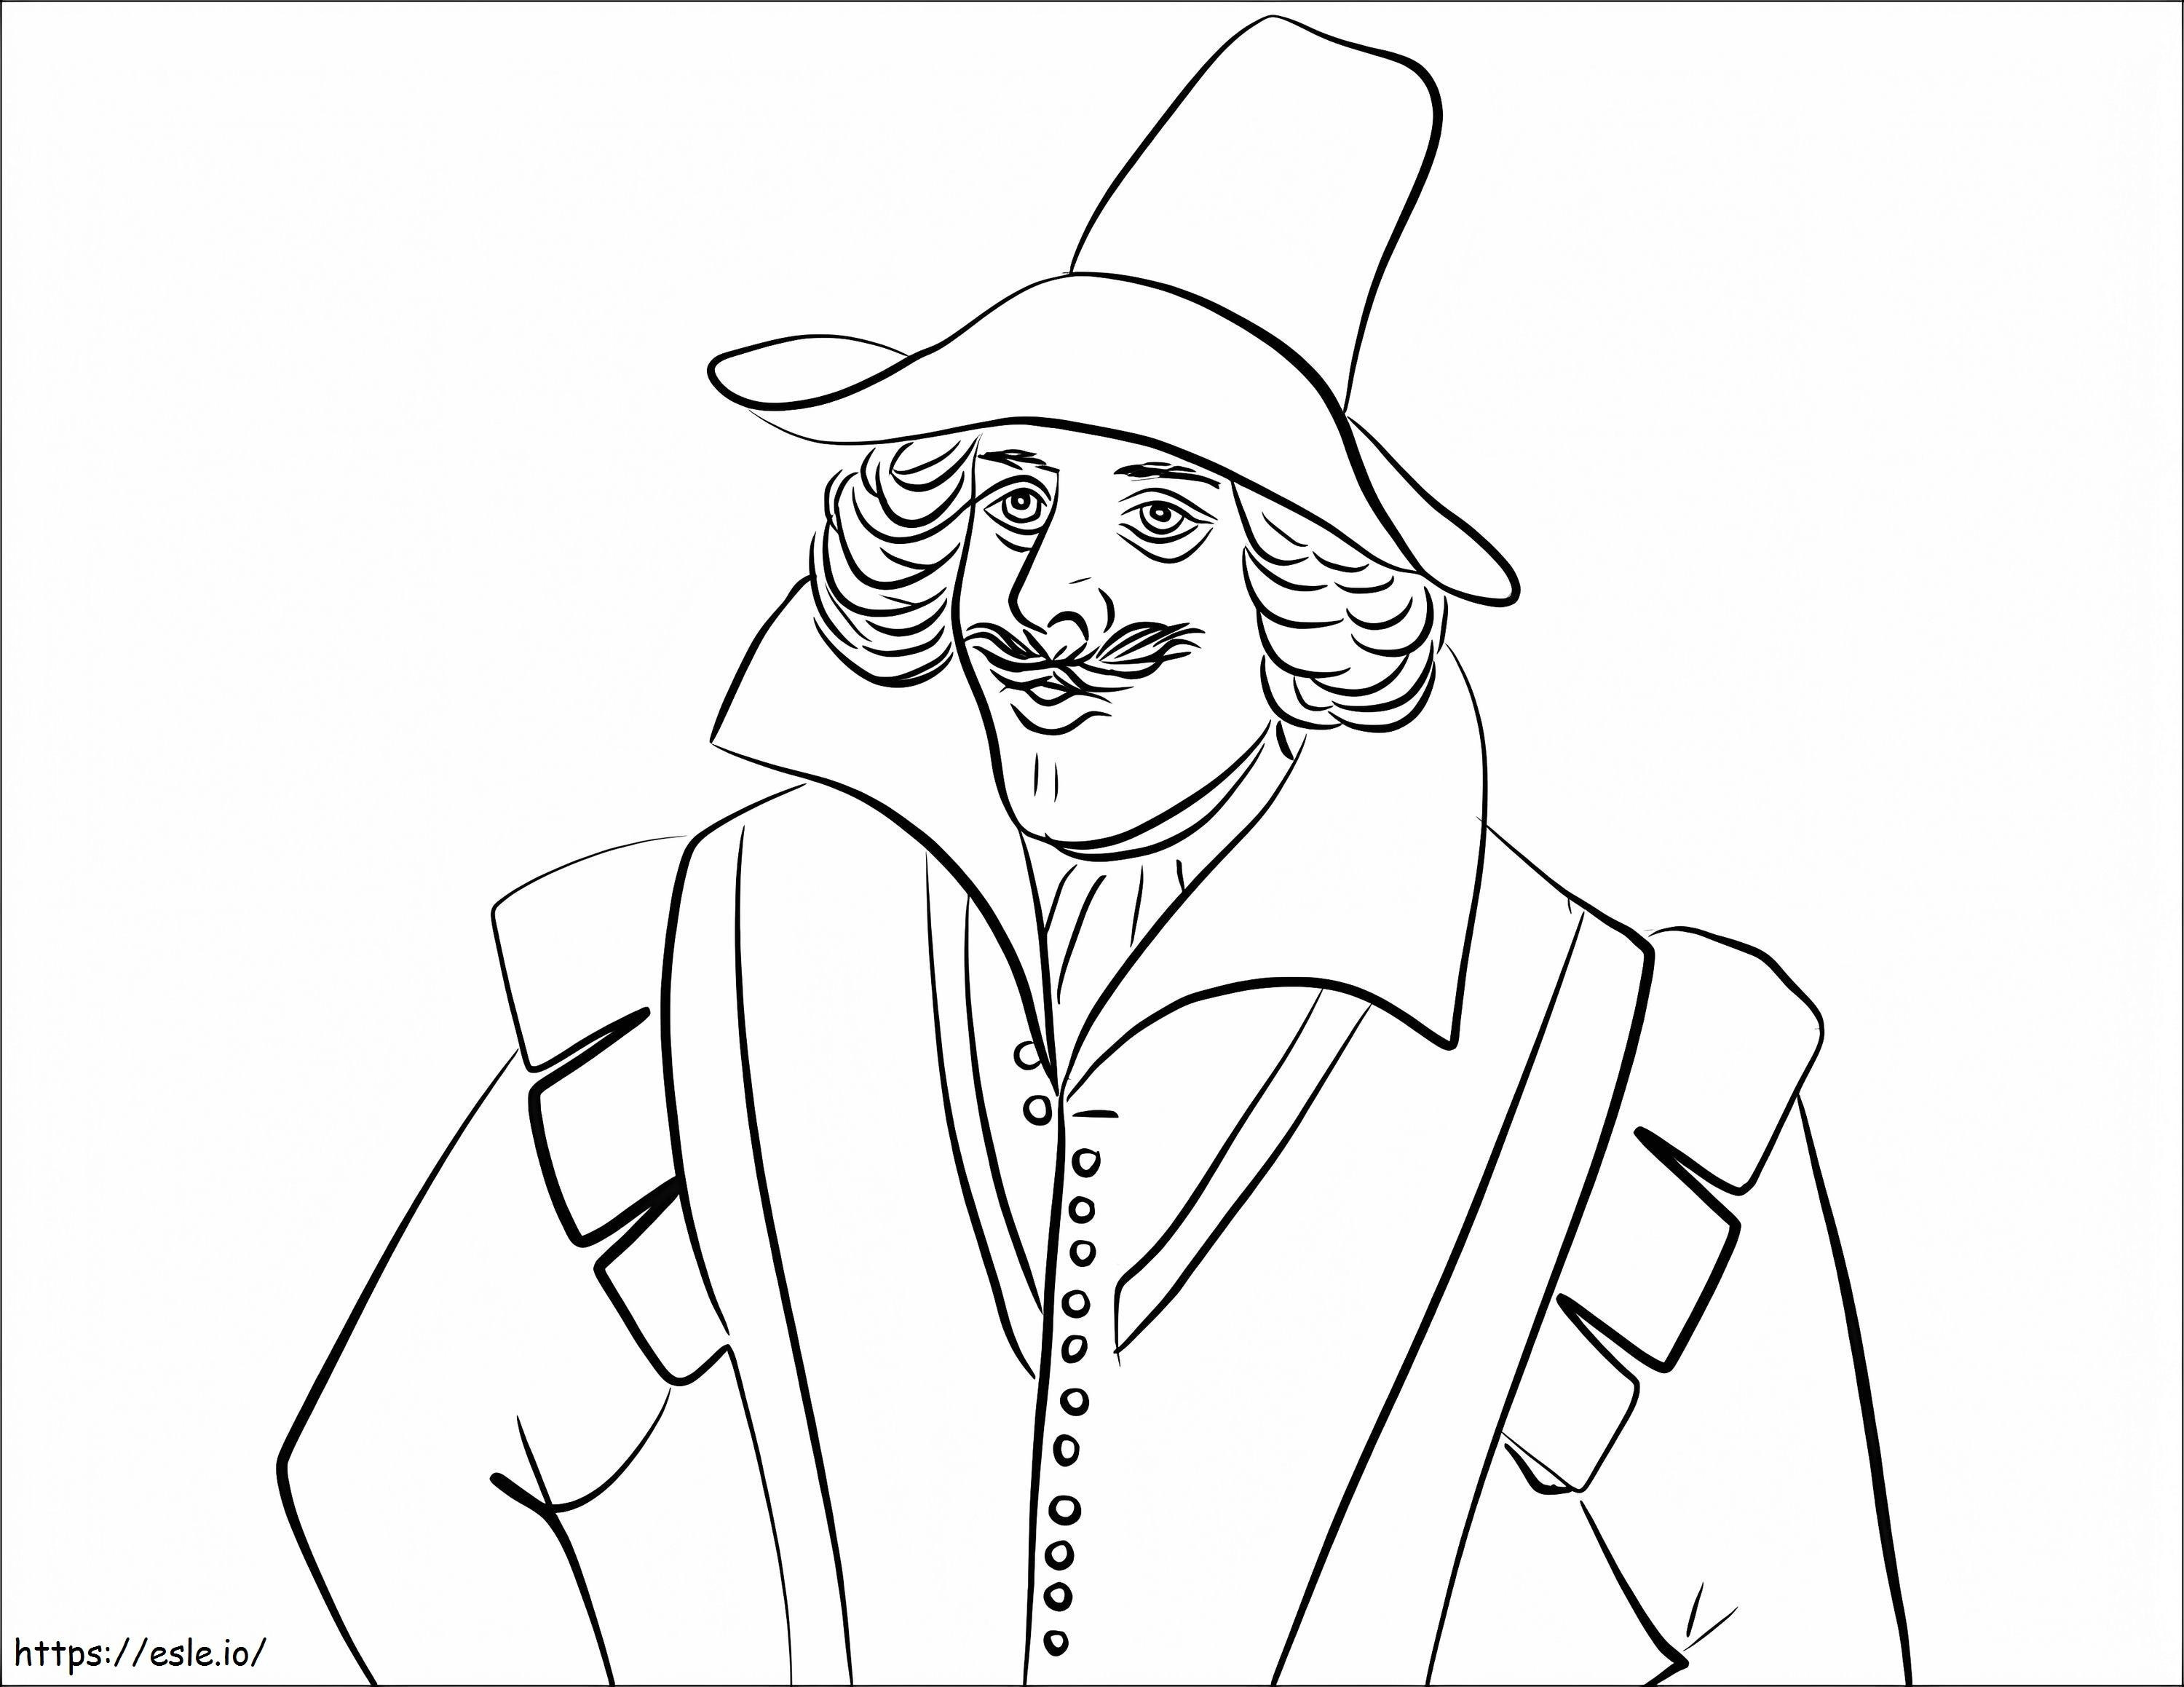 Guy Fawkes coloring page